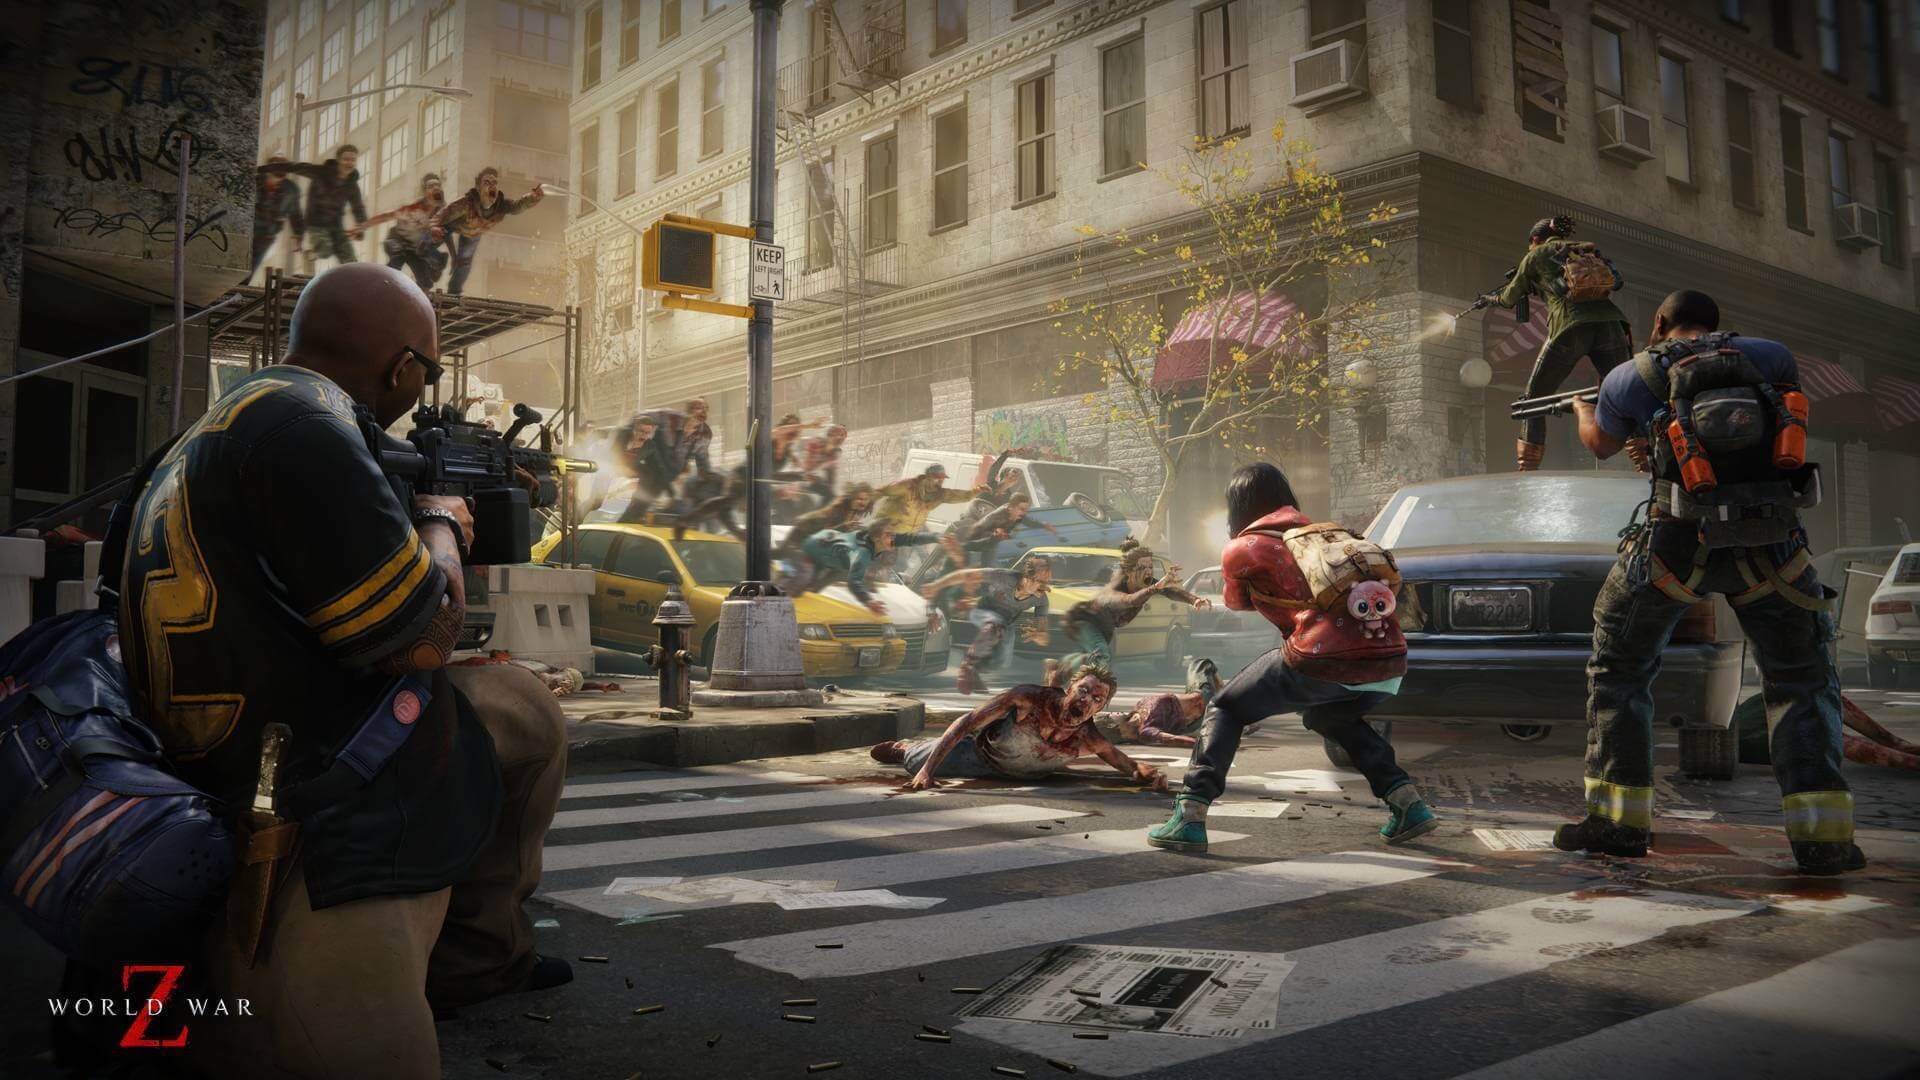 World War Z sells over one million copies in first week